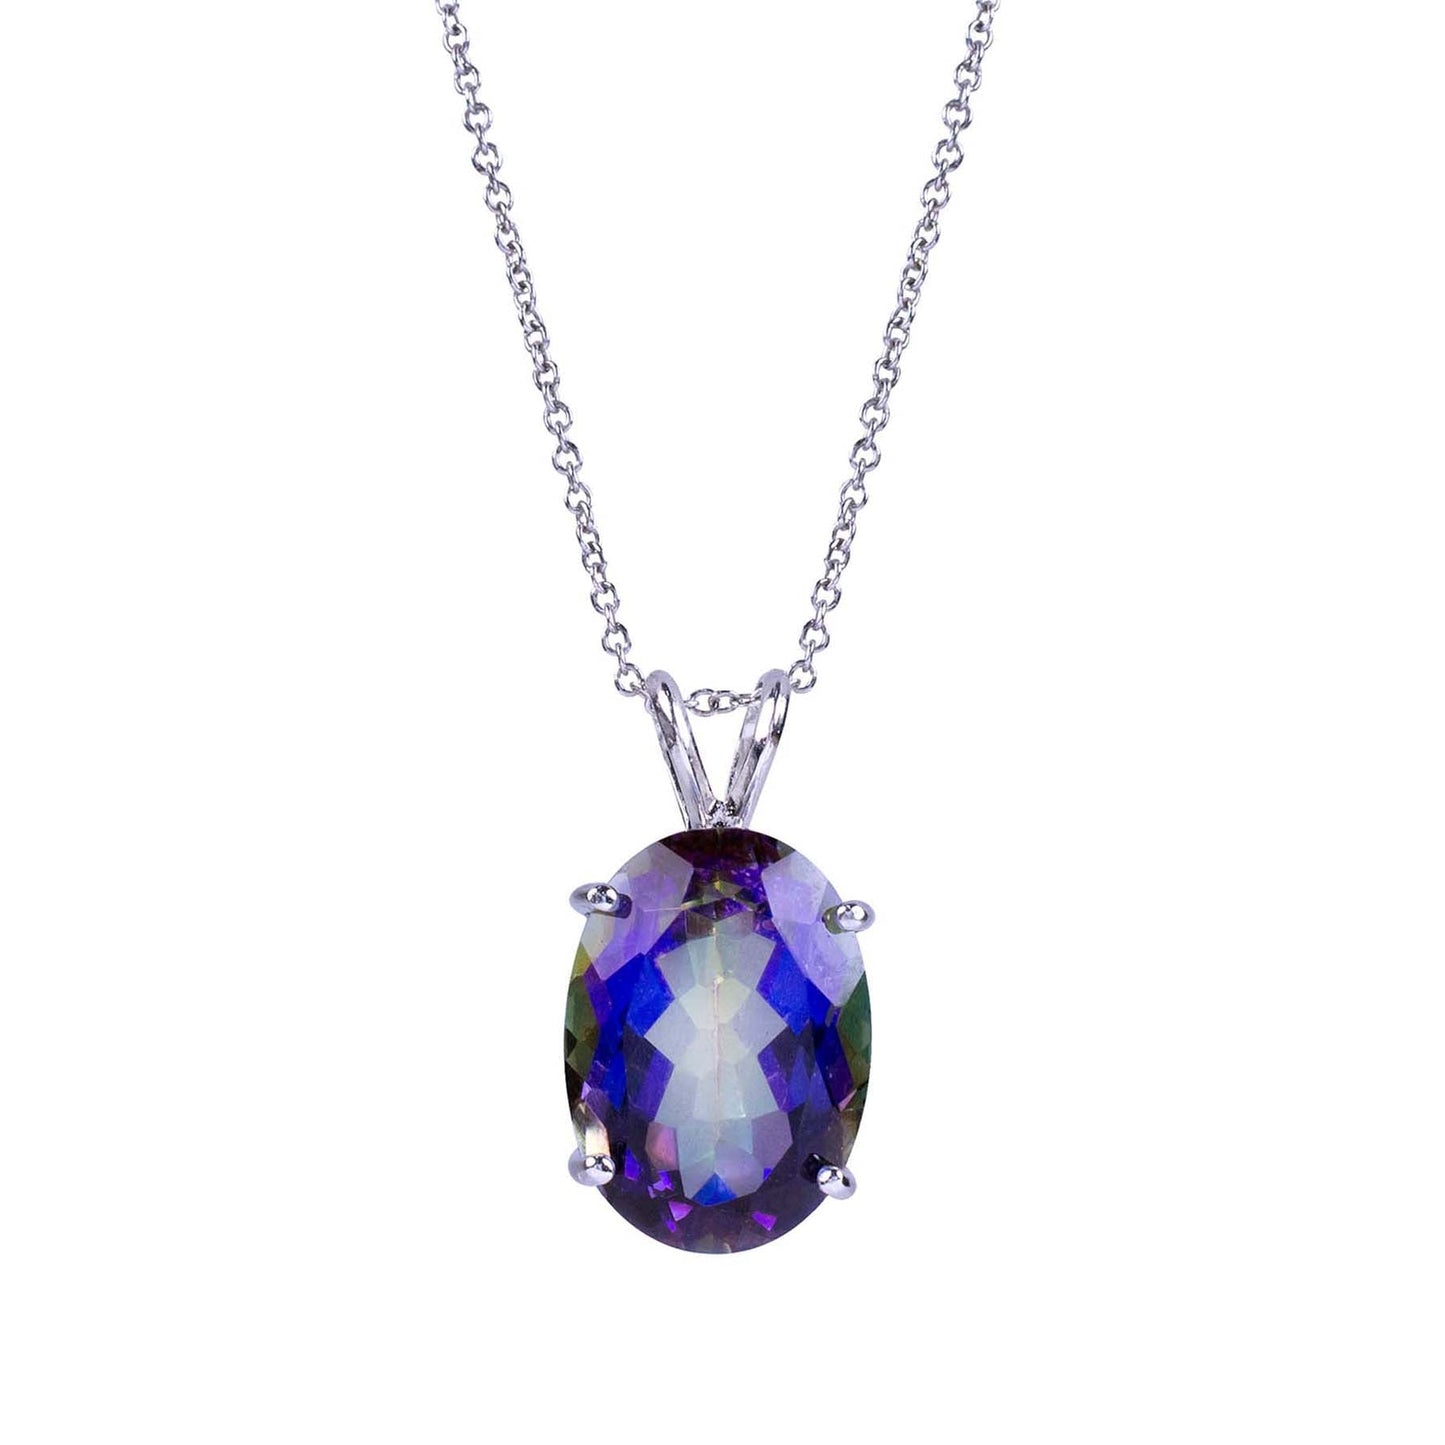 Sterling Silver Purple Mystic Topaz Oval Pendent Necklace 18" freeshipping - Jewelmak Shop